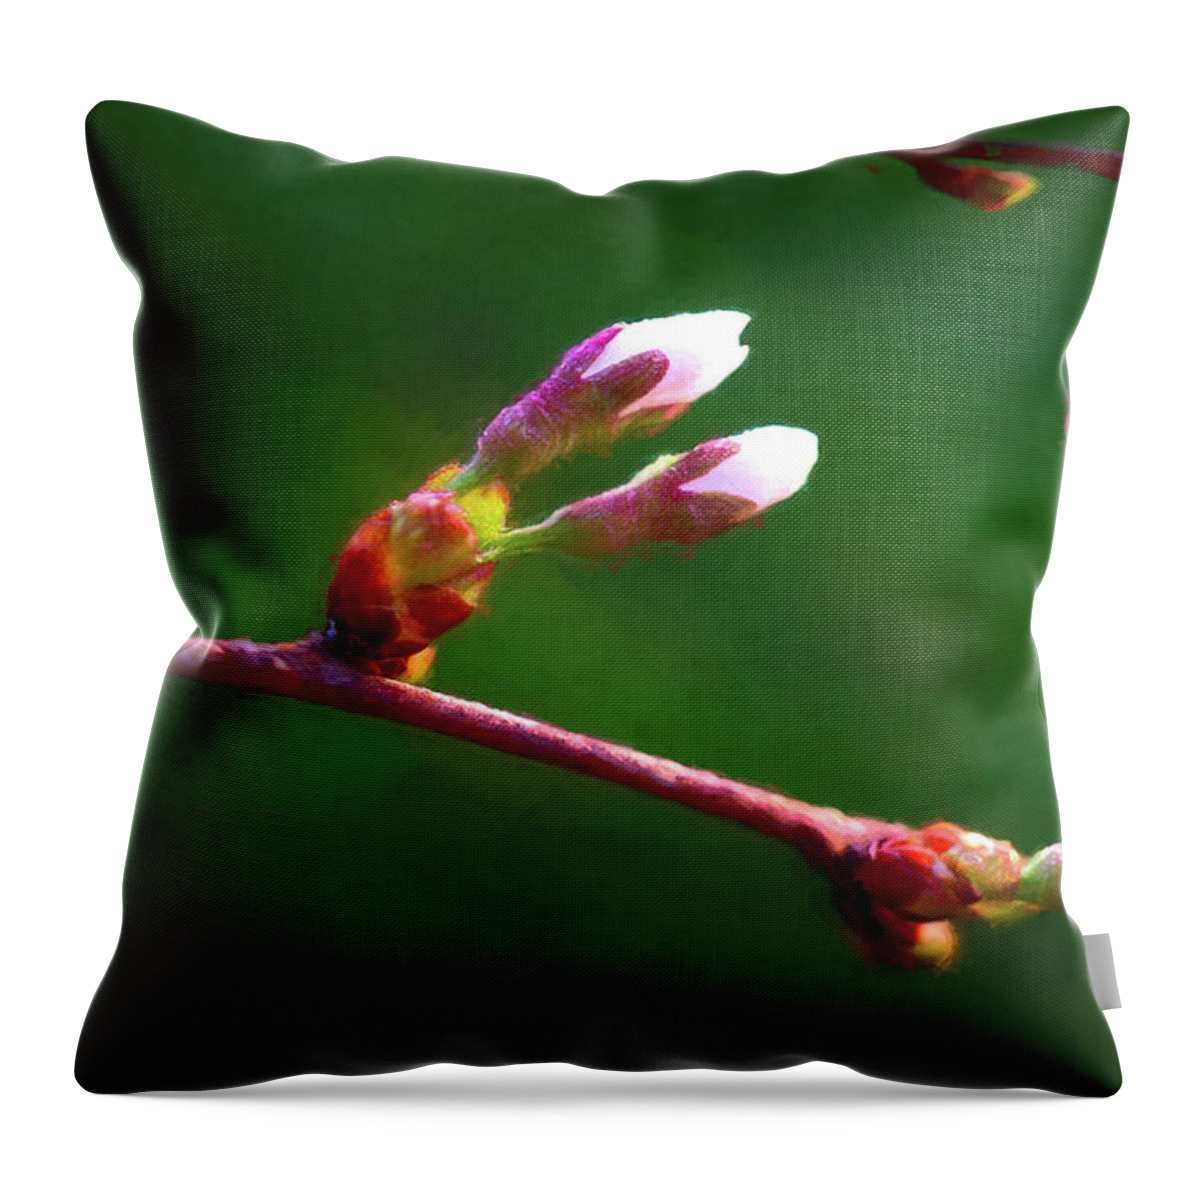 Tree Throw Pillow featuring the photograph Spring Buds - Weeping Cherry Tree by Tom Mc Nemar